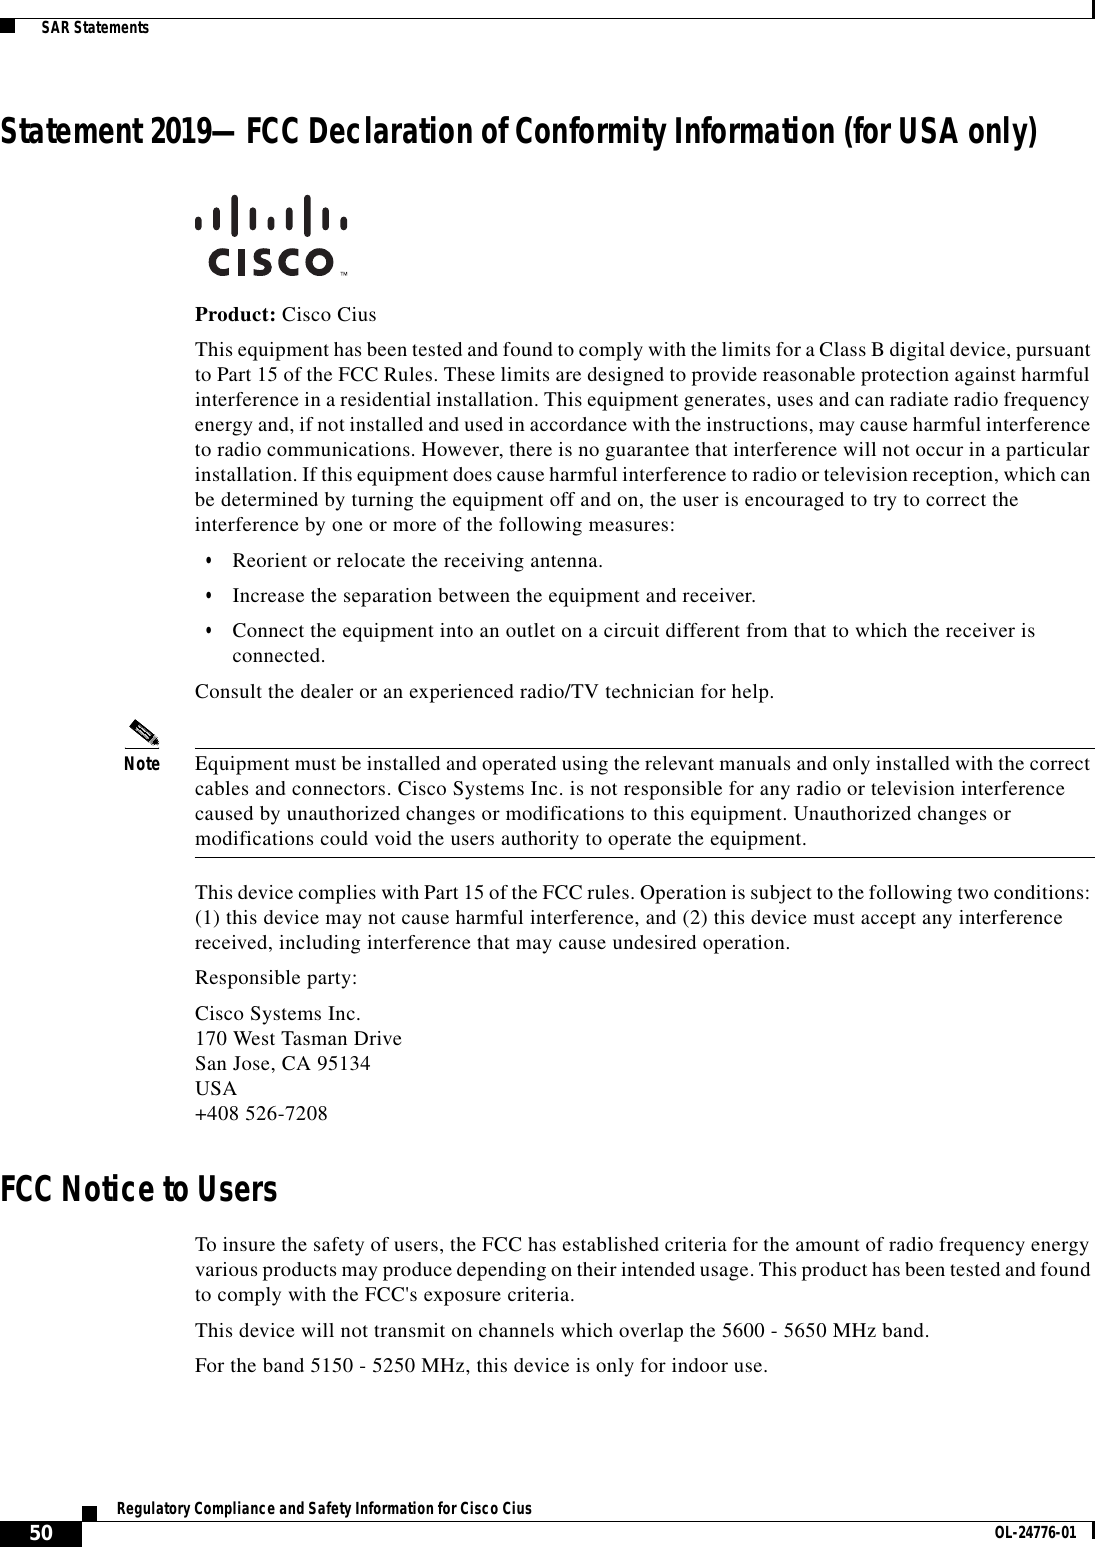  50Regulatory Compliance and Safety Information for Cisco Cius OL-24776-01  SAR StatementsStatement 2019—FCC Declaration of Conformity Information (for USA only)Product: Cisco CiusThis equipment has been tested and found to comply with the limits for a Class B digital device, pursuant to Part 15 of the FCC Rules. These limits are designed to provide reasonable protection against harmful interference in a residential installation. This equipment generates, uses and can radiate radio frequency energy and, if not installed and used in accordance with the instructions, may cause harmful interference to radio communications. However, there is no guarantee that interference will not occur in a particular installation. If this equipment does cause harmful interference to radio or television reception, which can be determined by turning the equipment off and on, the user is encouraged to try to correct the interference by one or more of the following measures: • Reorient or relocate the receiving antenna.  • Increase the separation between the equipment and receiver.  • Connect the equipment into an outlet on a circuit different from that to which the receiver is connected. Consult the dealer or an experienced radio/TV technician for help.Note Equipment must be installed and operated using the relevant manuals and only installed with the correct cables and connectors. Cisco Systems Inc. is not responsible for any radio or television interference caused by unauthorized changes or modifications to this equipment. Unauthorized changes or modifications could void the users authority to operate the equipment.This device complies with Part 15 of the FCC rules. Operation is subject to the following two conditions: (1) this device may not cause harmful interference, and (2) this device must accept any interference received, including interference that may cause undesired operation.Responsible party:Cisco Systems Inc. 170 West Tasman Drive San Jose, CA 95134 USA +408 526-7208FCC Notice to UsersTo insure the safety of users, the FCC has established criteria for the amount of radio frequency energy various products may produce depending on their intended usage. This product has been tested and found to comply with the FCC&apos;s exposure criteria.This device will not transmit on channels which overlap the 5600 - 5650 MHz band.For the band 5150 - 5250 MHz, this device is only for indoor use.